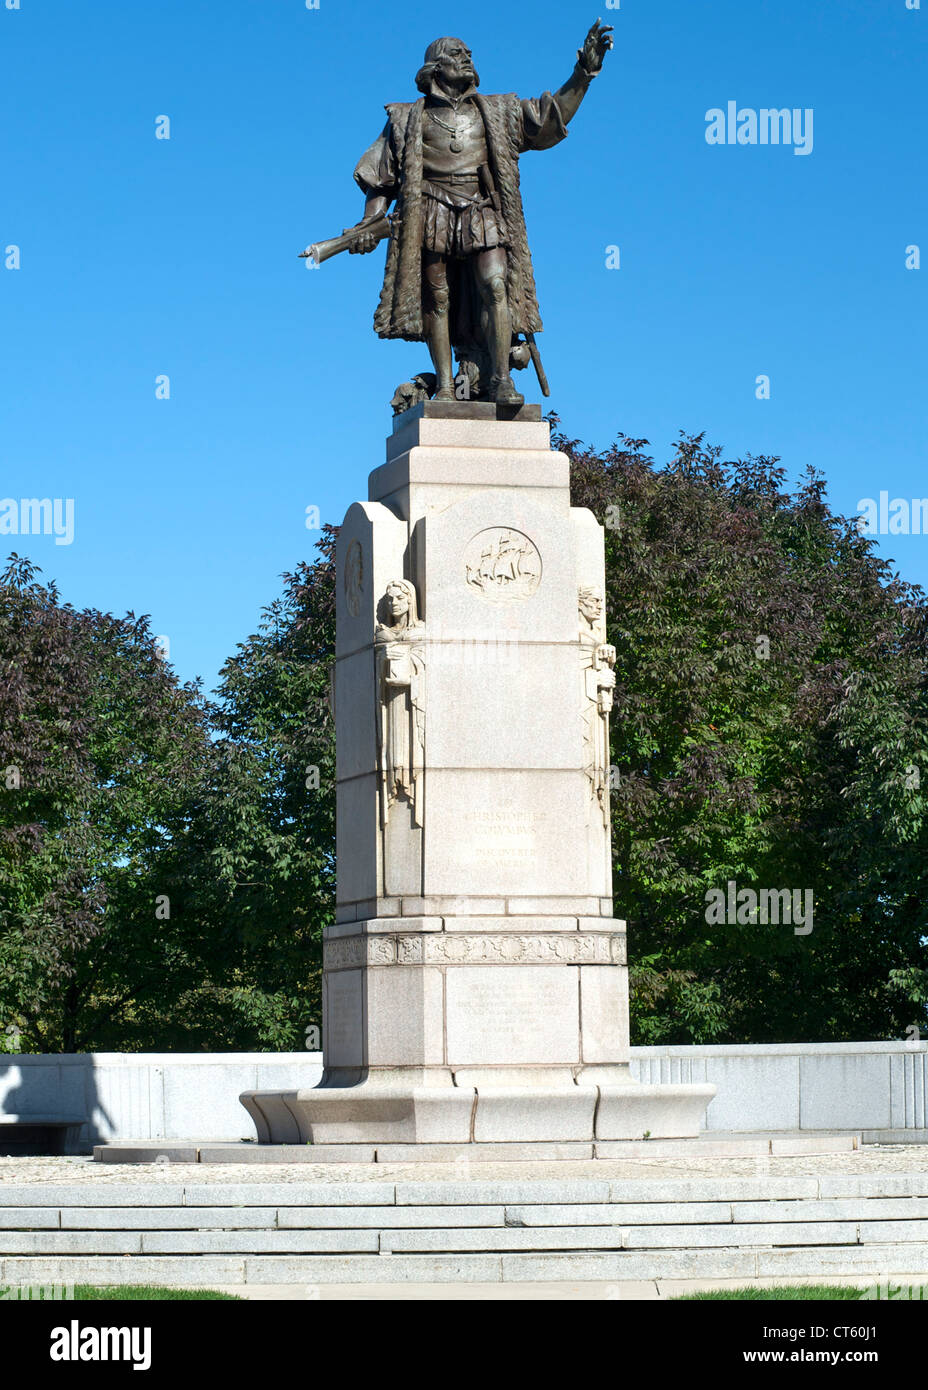 The Columbus Monument in Grant Park in Chicago, Illinois, USA. Stock Photo